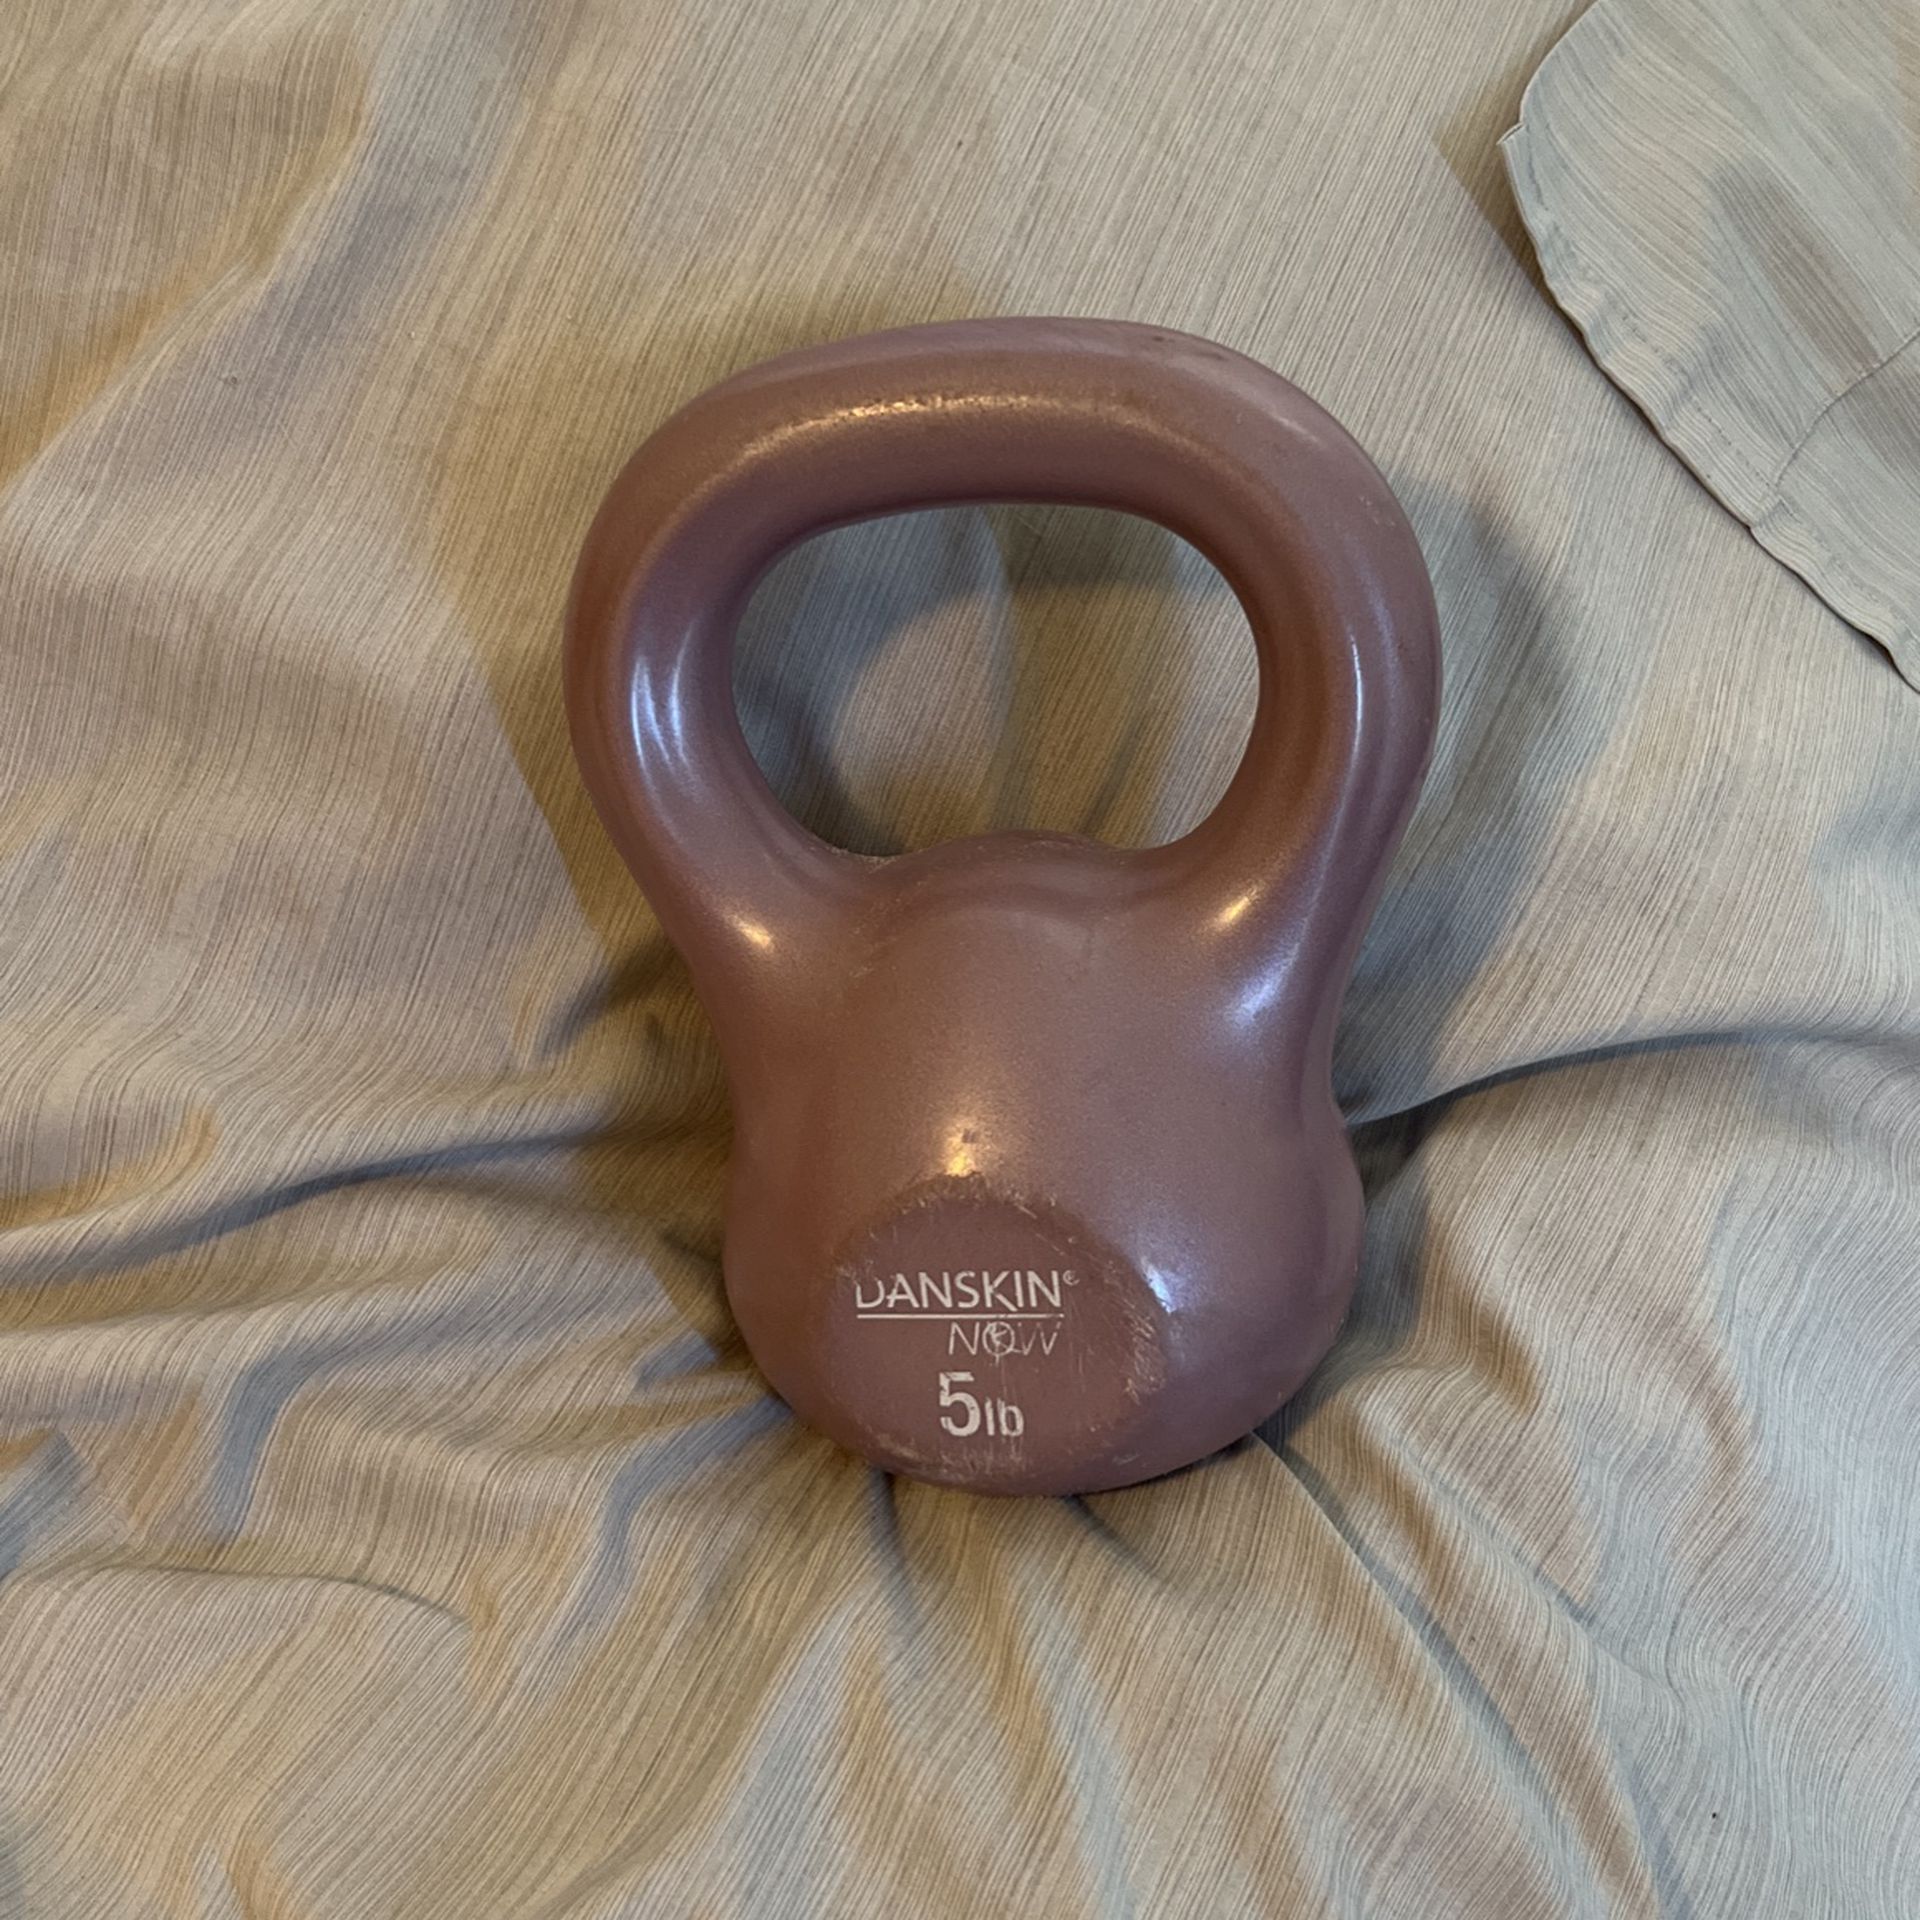 5 Pound Kettle Bell